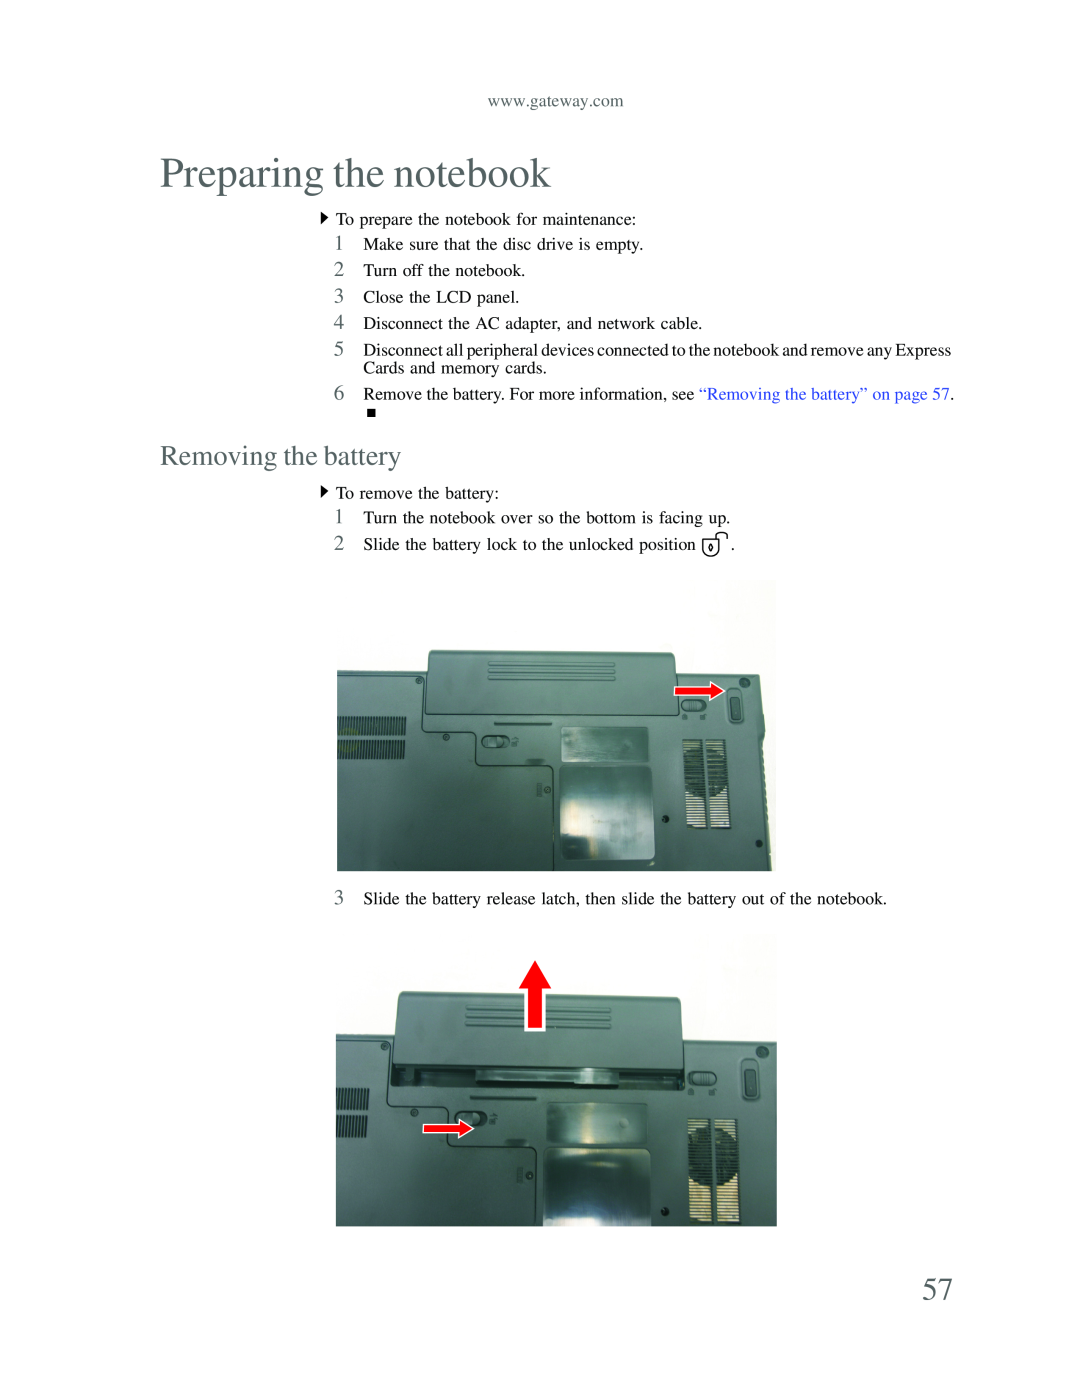 Gateway p-79 manual Preparing the notebook, Removing the battery 